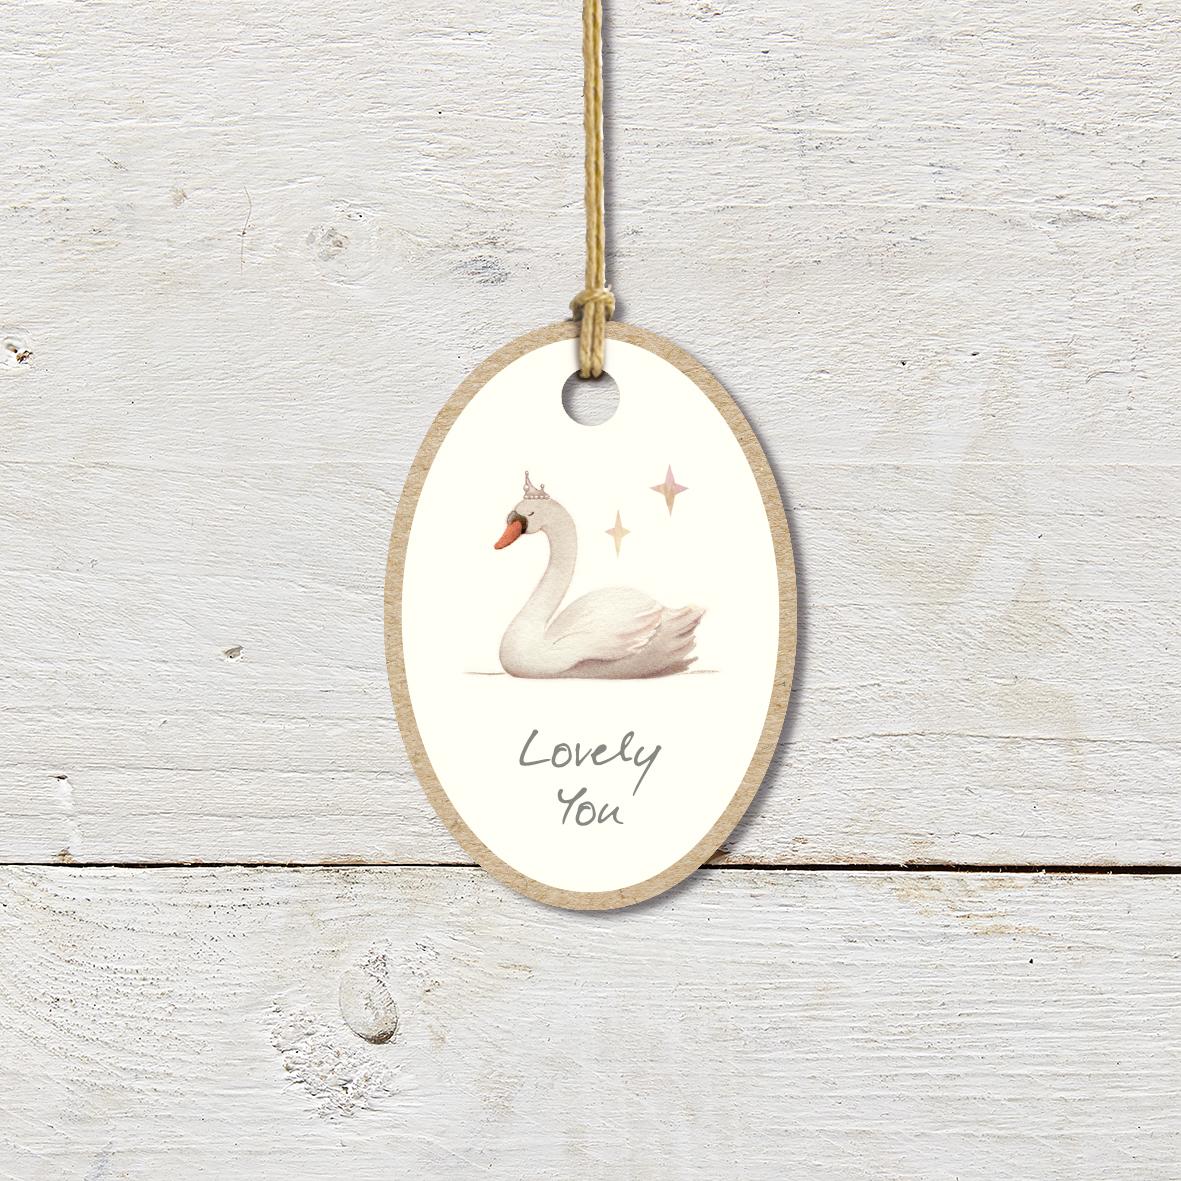 Small Wooden Keepsake Plaque/Tag featuring a cute swan wearing a tiara with a ’Lovely You’ caption.